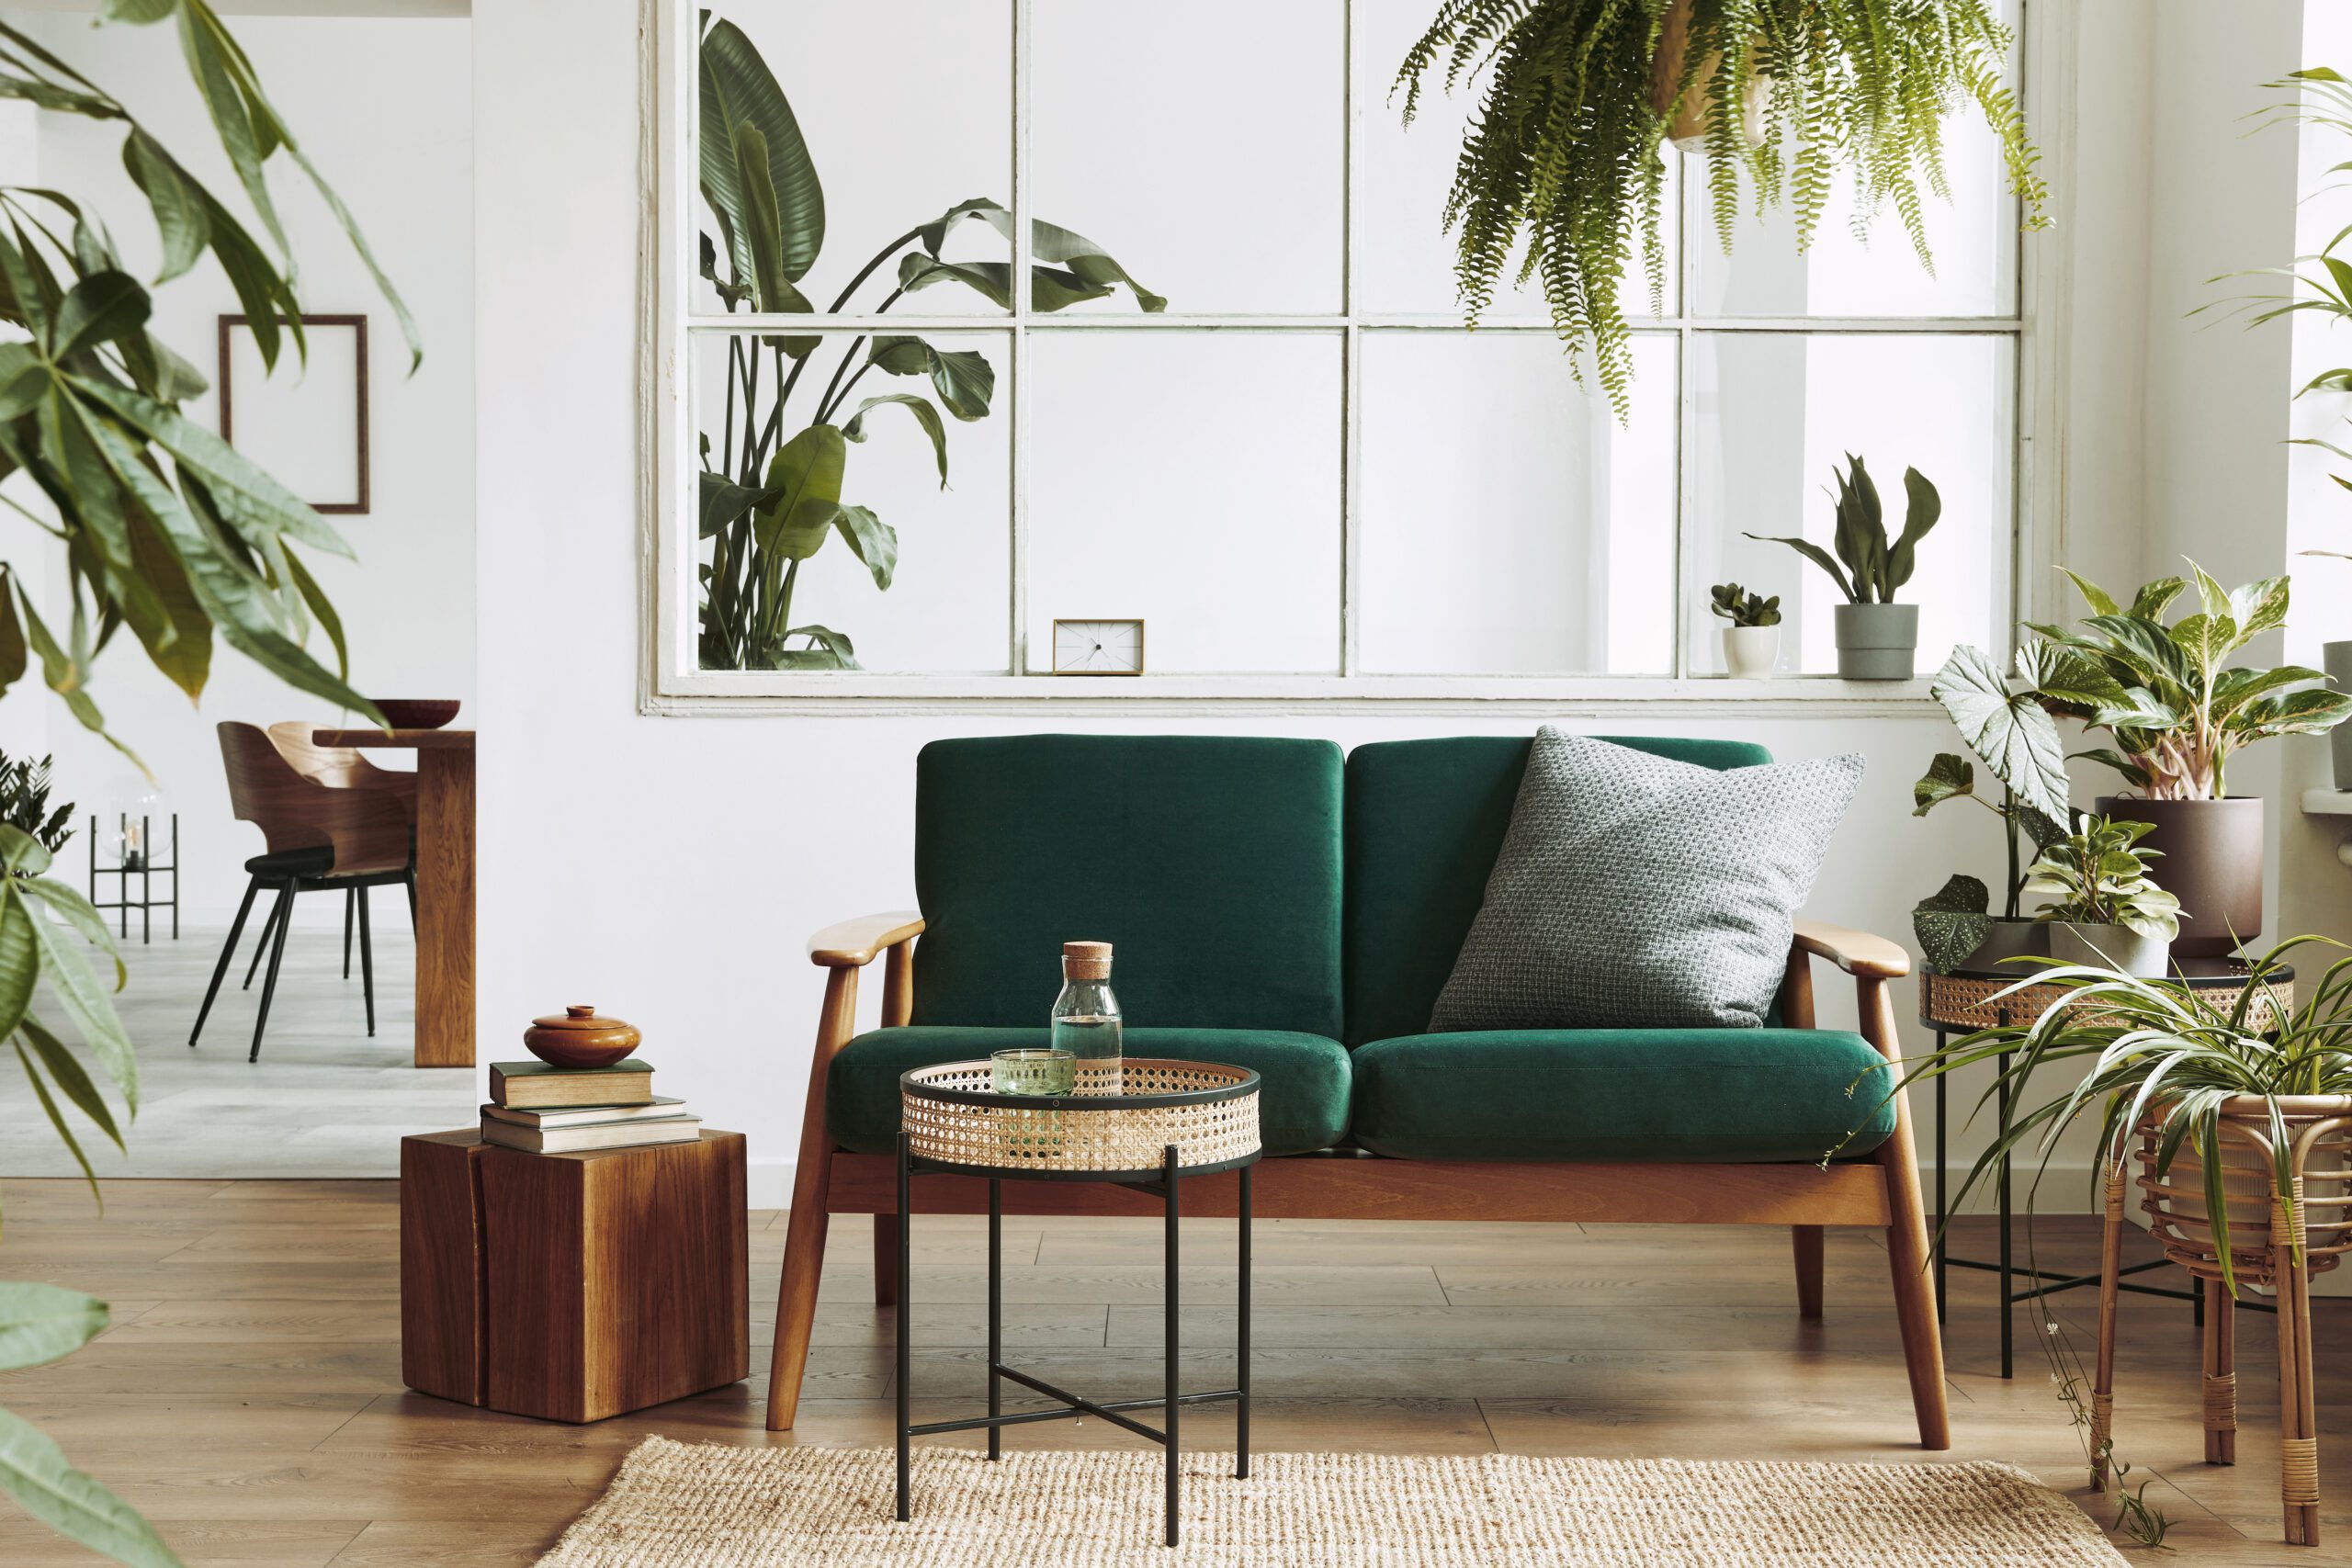 A green love seat in a living room with different plants surrounding it.